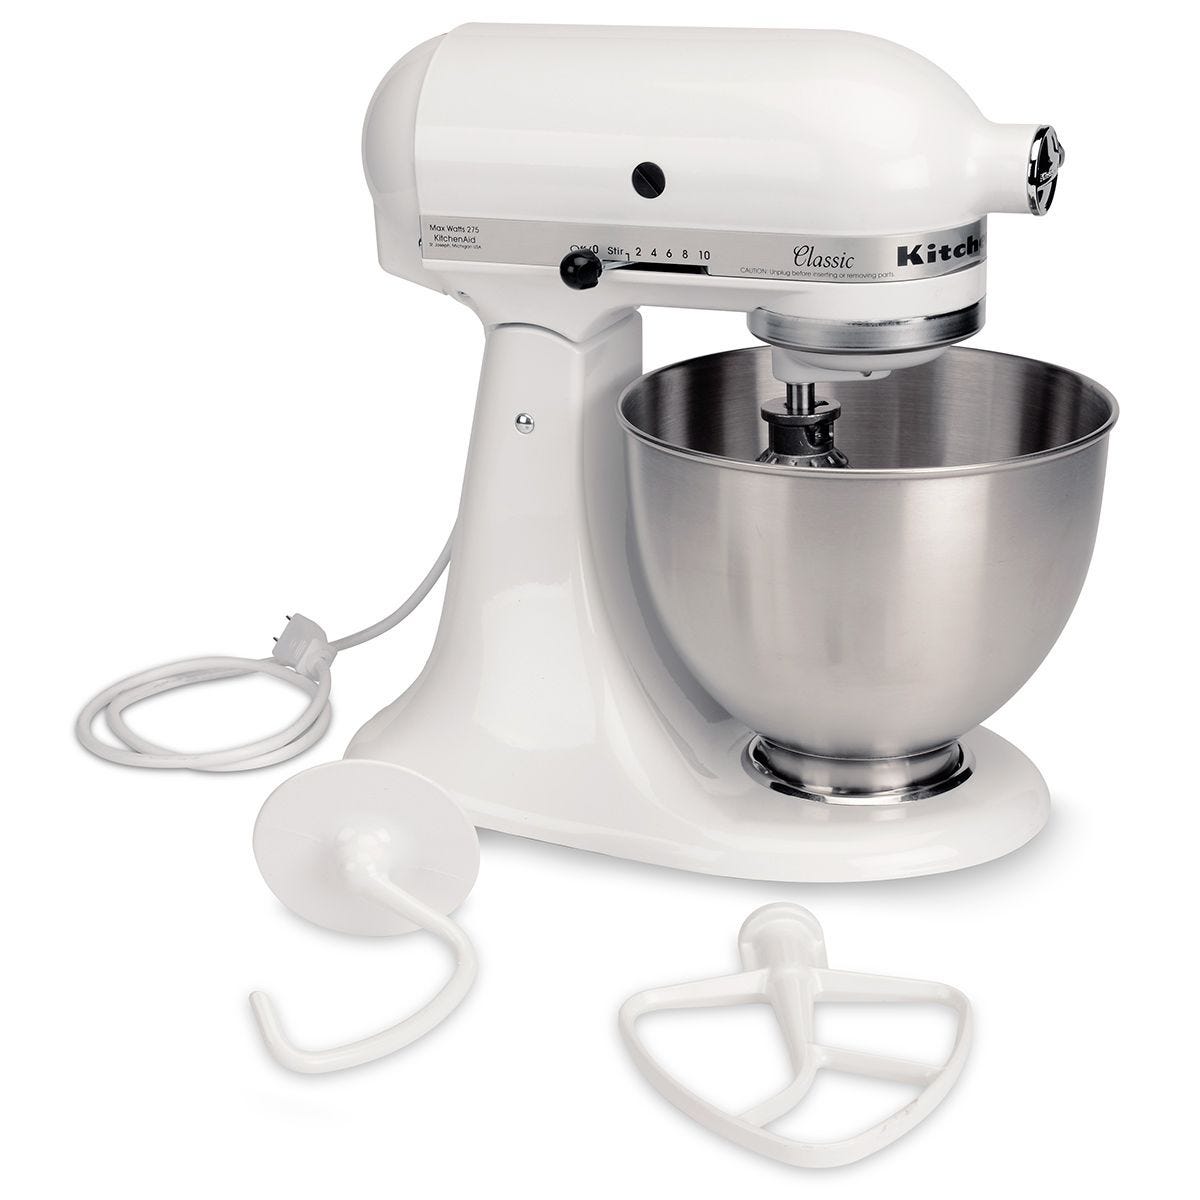 Carrying Bag Compatible for KitchenAid Mixers (6-8 Quart) and Extra  Accessories,Storage Bag Only